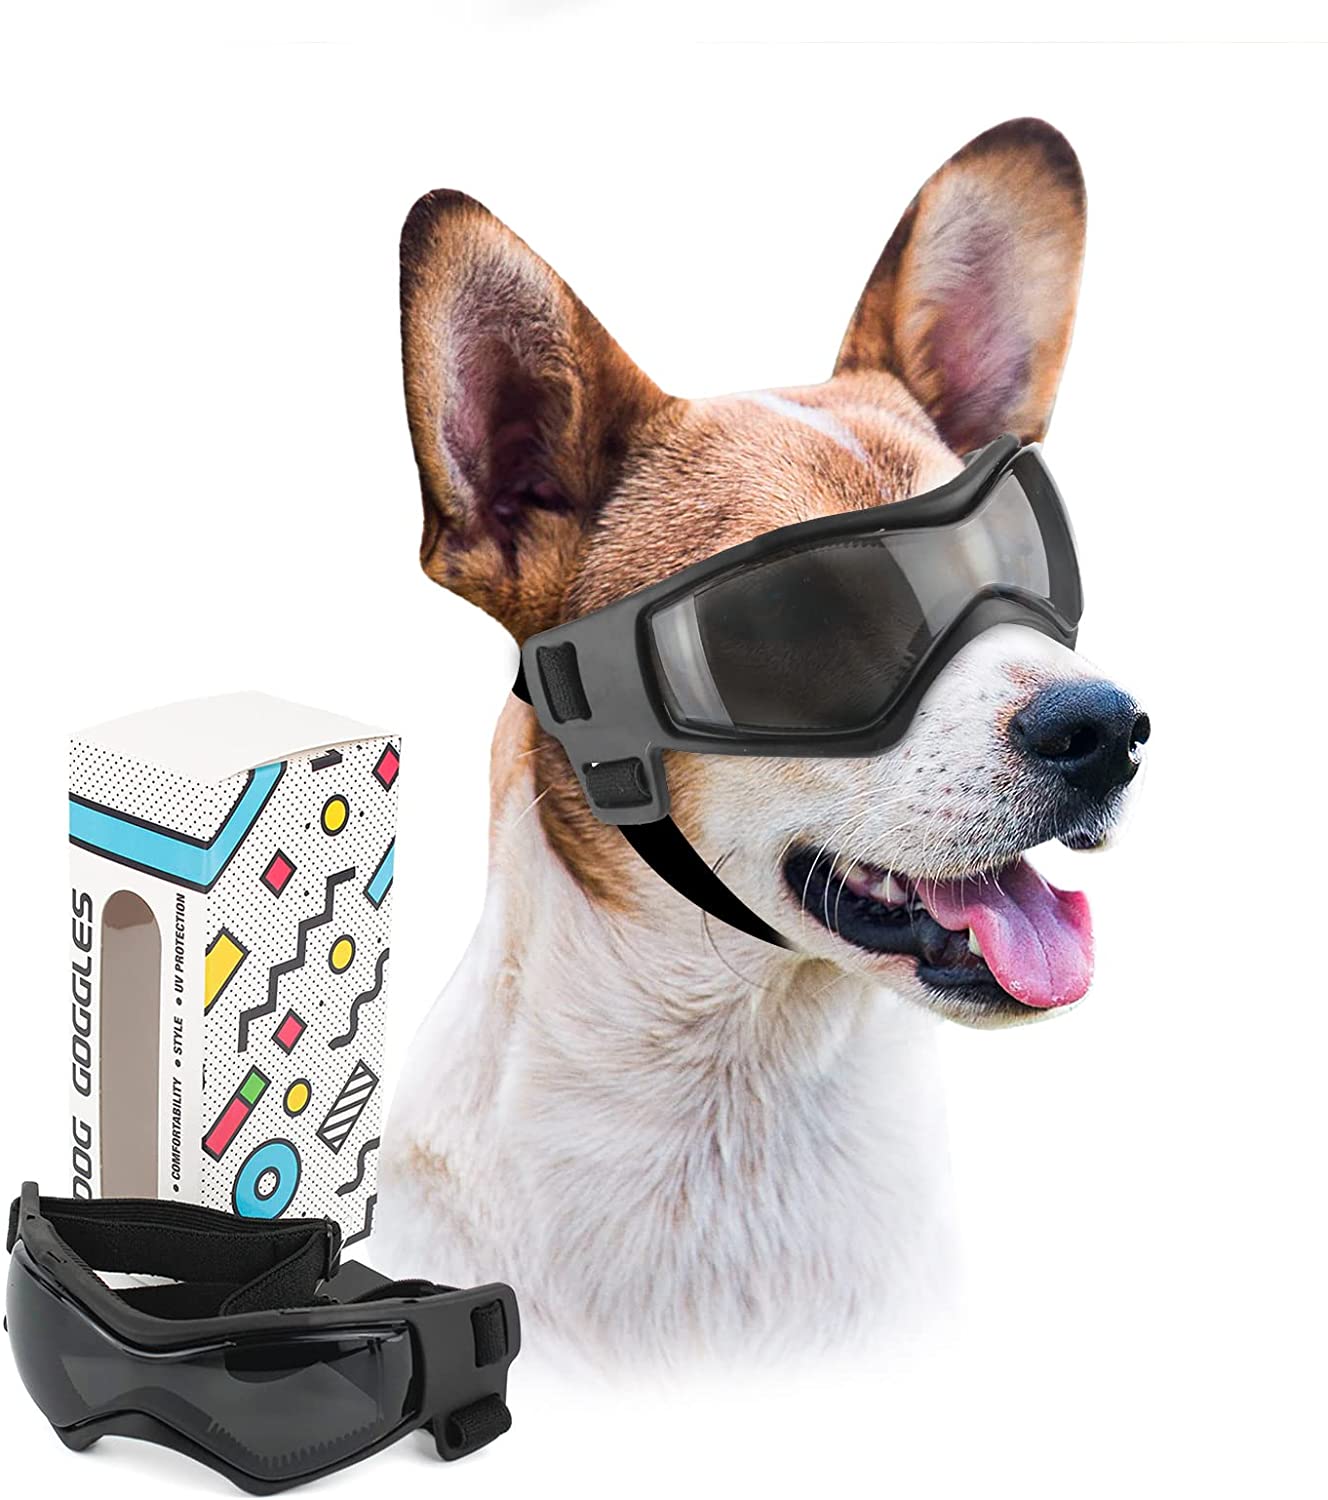 Dog Goggles Small Breed,Easy Wear Small Dog Sunglasses,Adjustable UV Protection Puppy Sunglasses for Small to Medium Dog